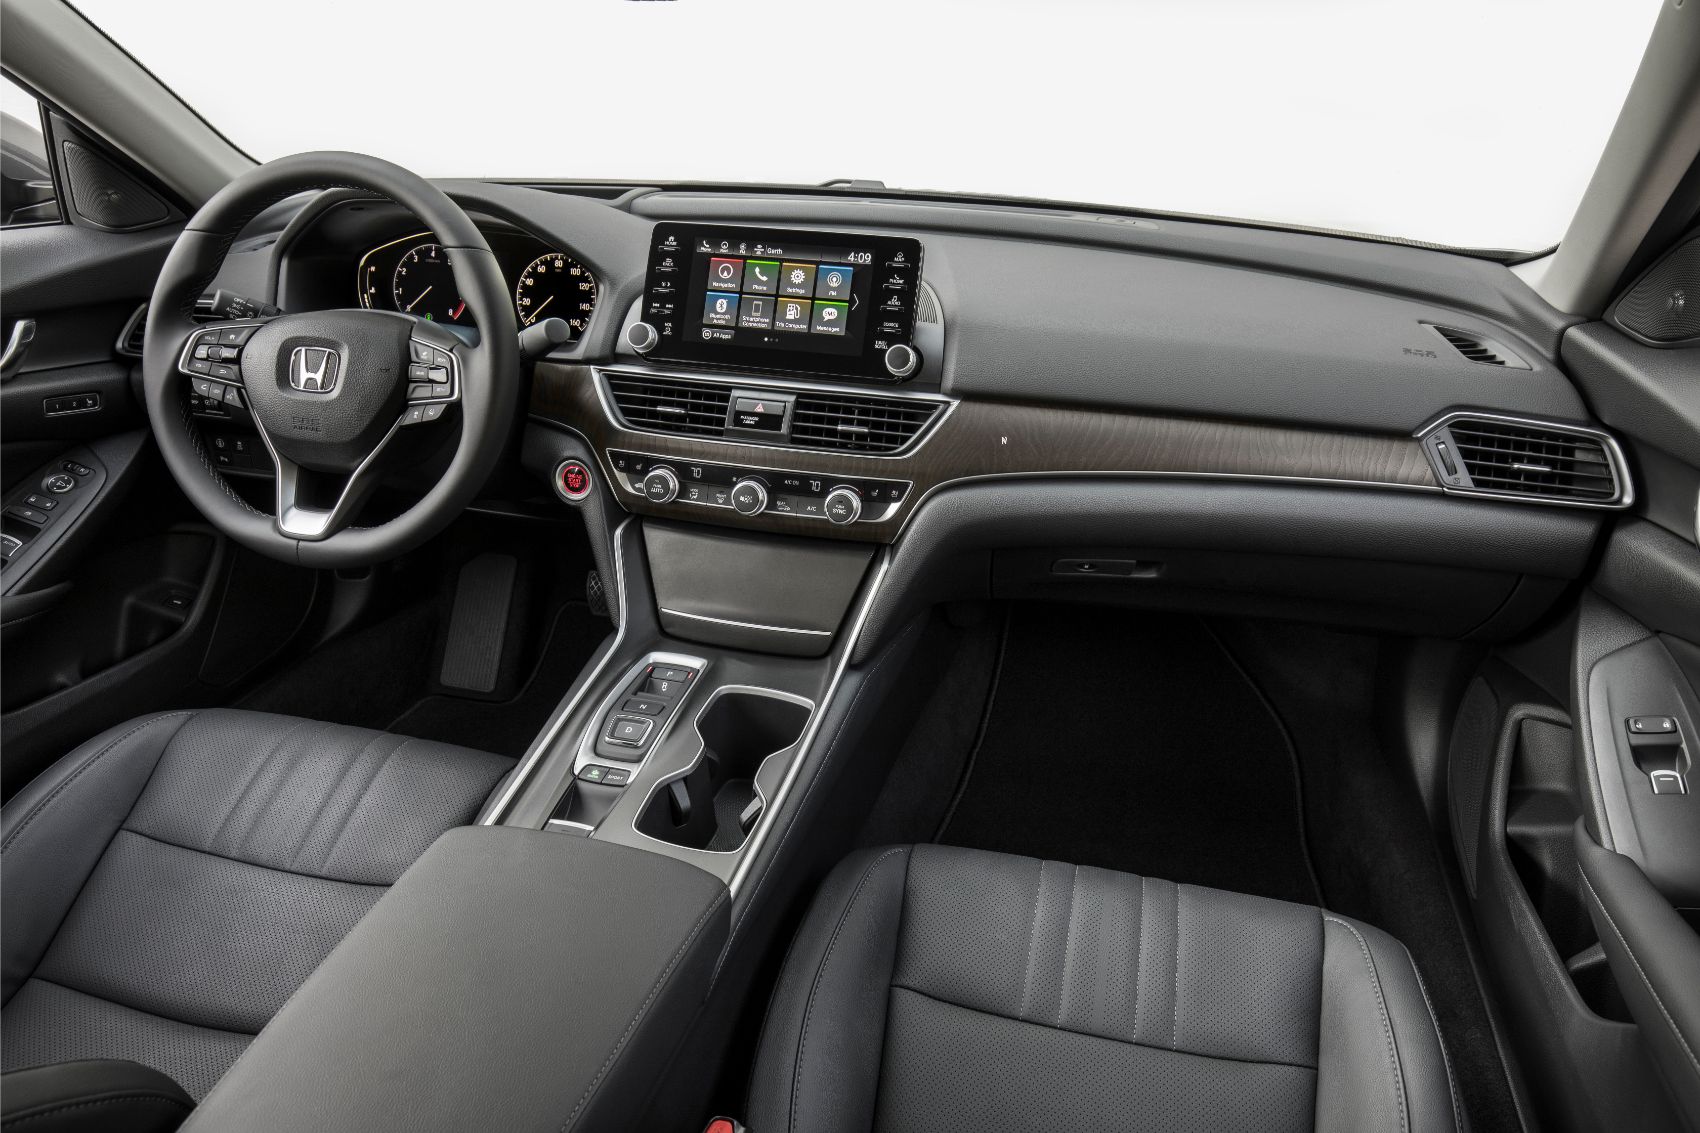 2019 Honda Accord Review How Does The Popular Sedan Stack Up